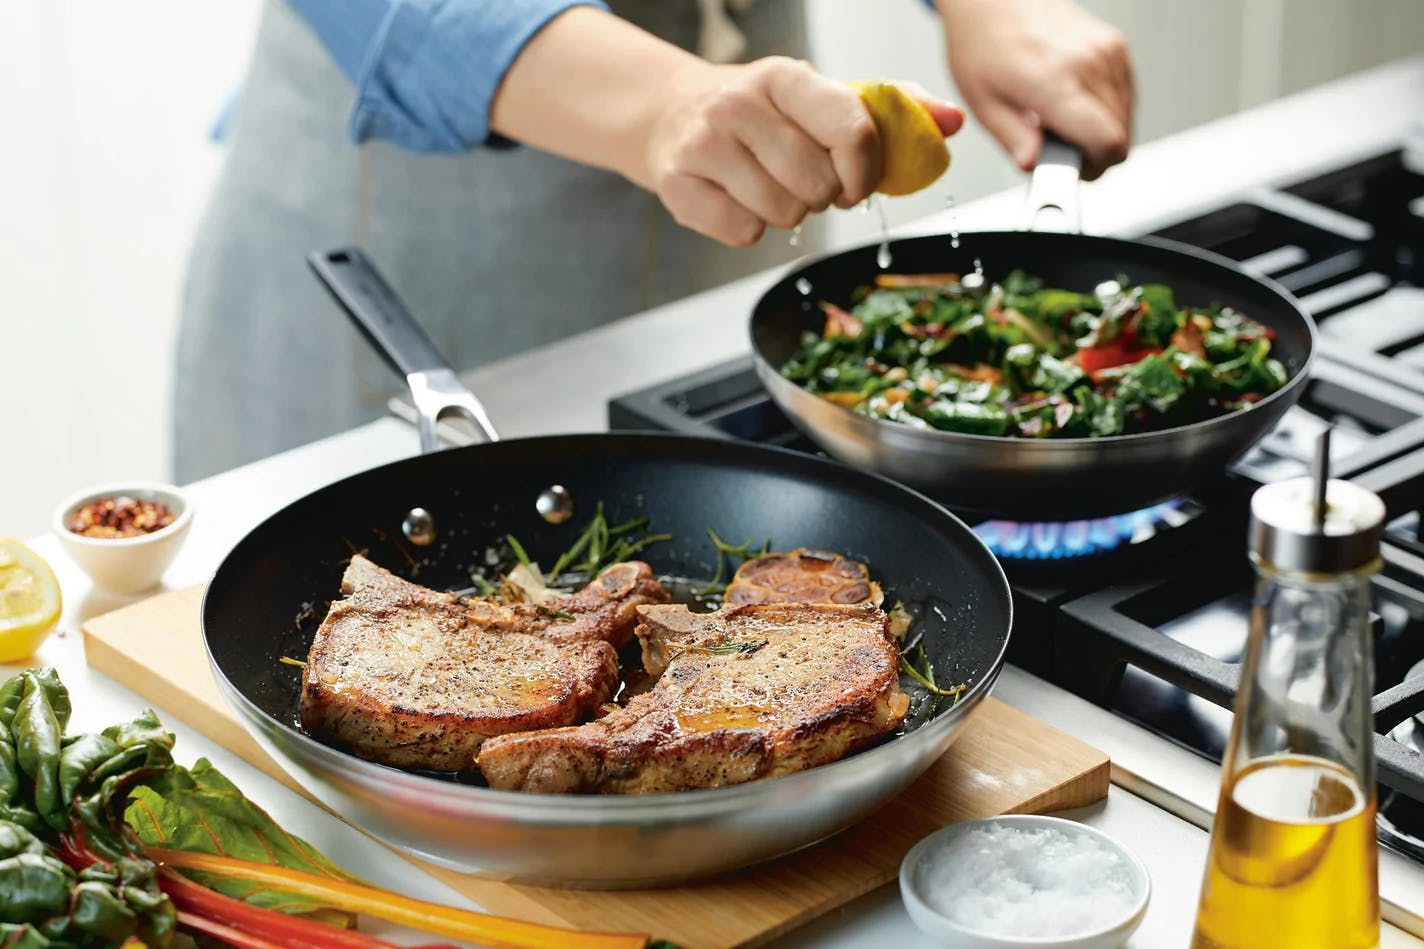 KitchenAid Stainless Steel Nonstick Induction Frying Pan Set, 2-Piece, Brushed Stainless Steel